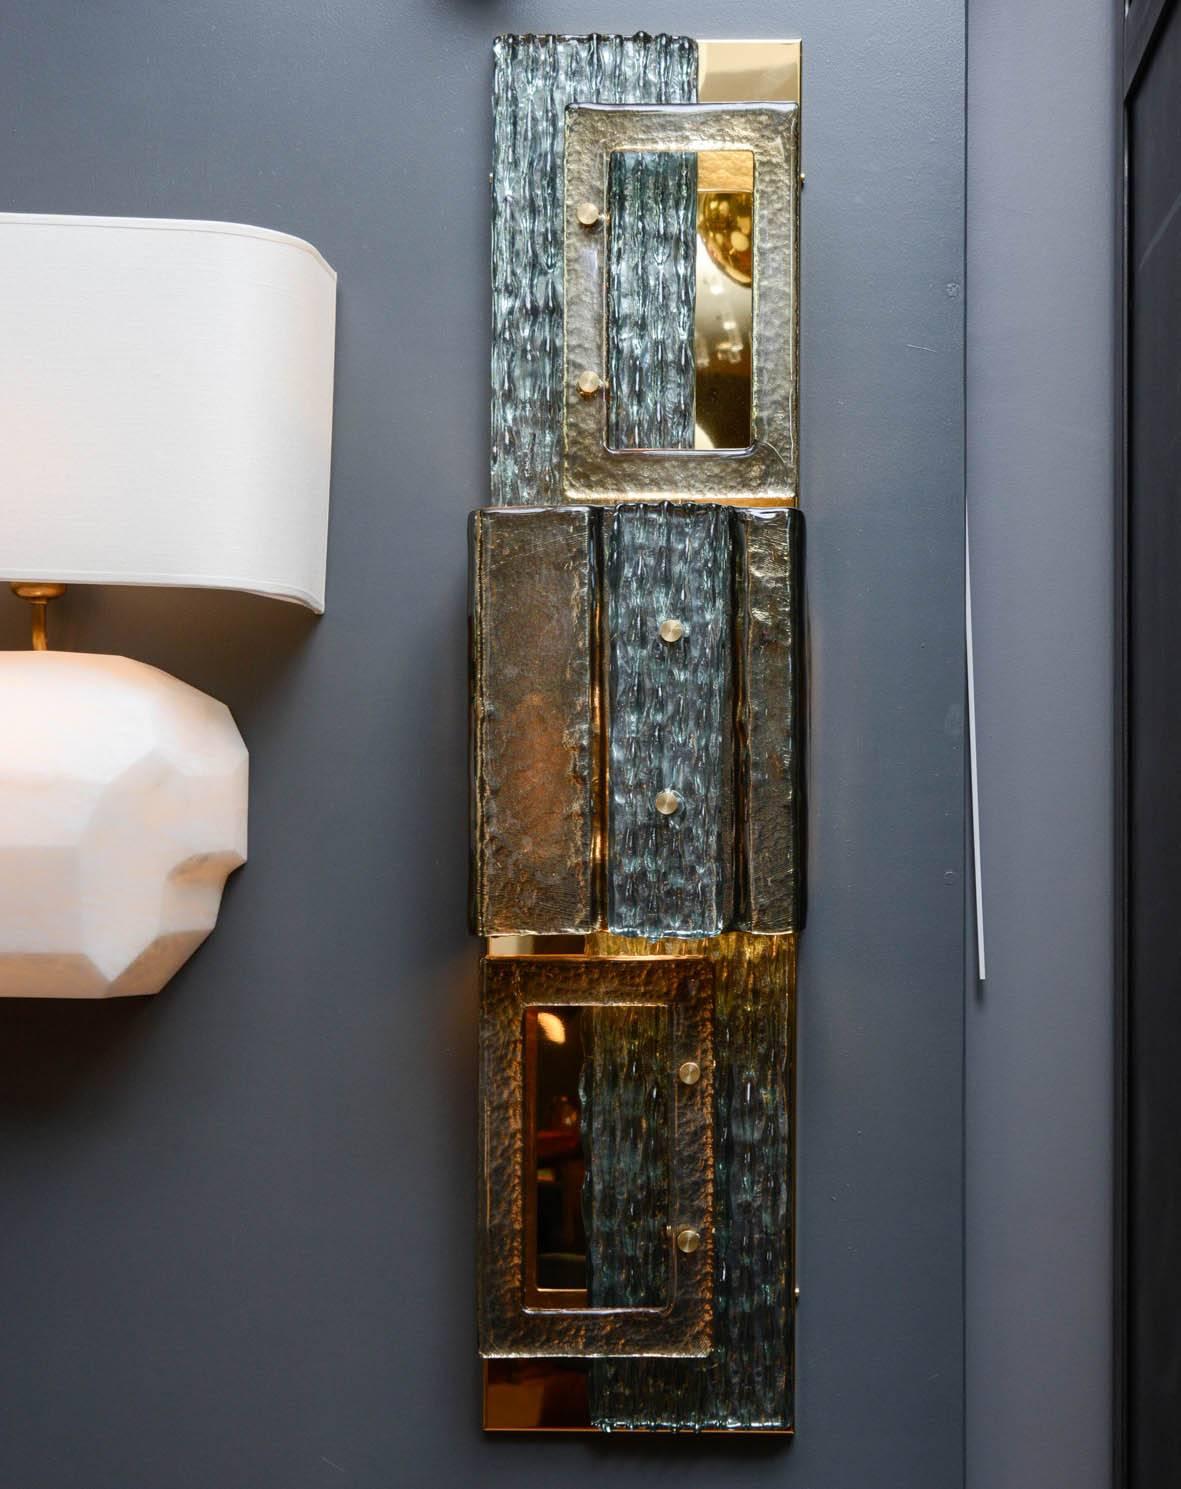 Rectangular tall wall sconces made of brass with different overlayed Murano glass panels.

Four lights per sconce.